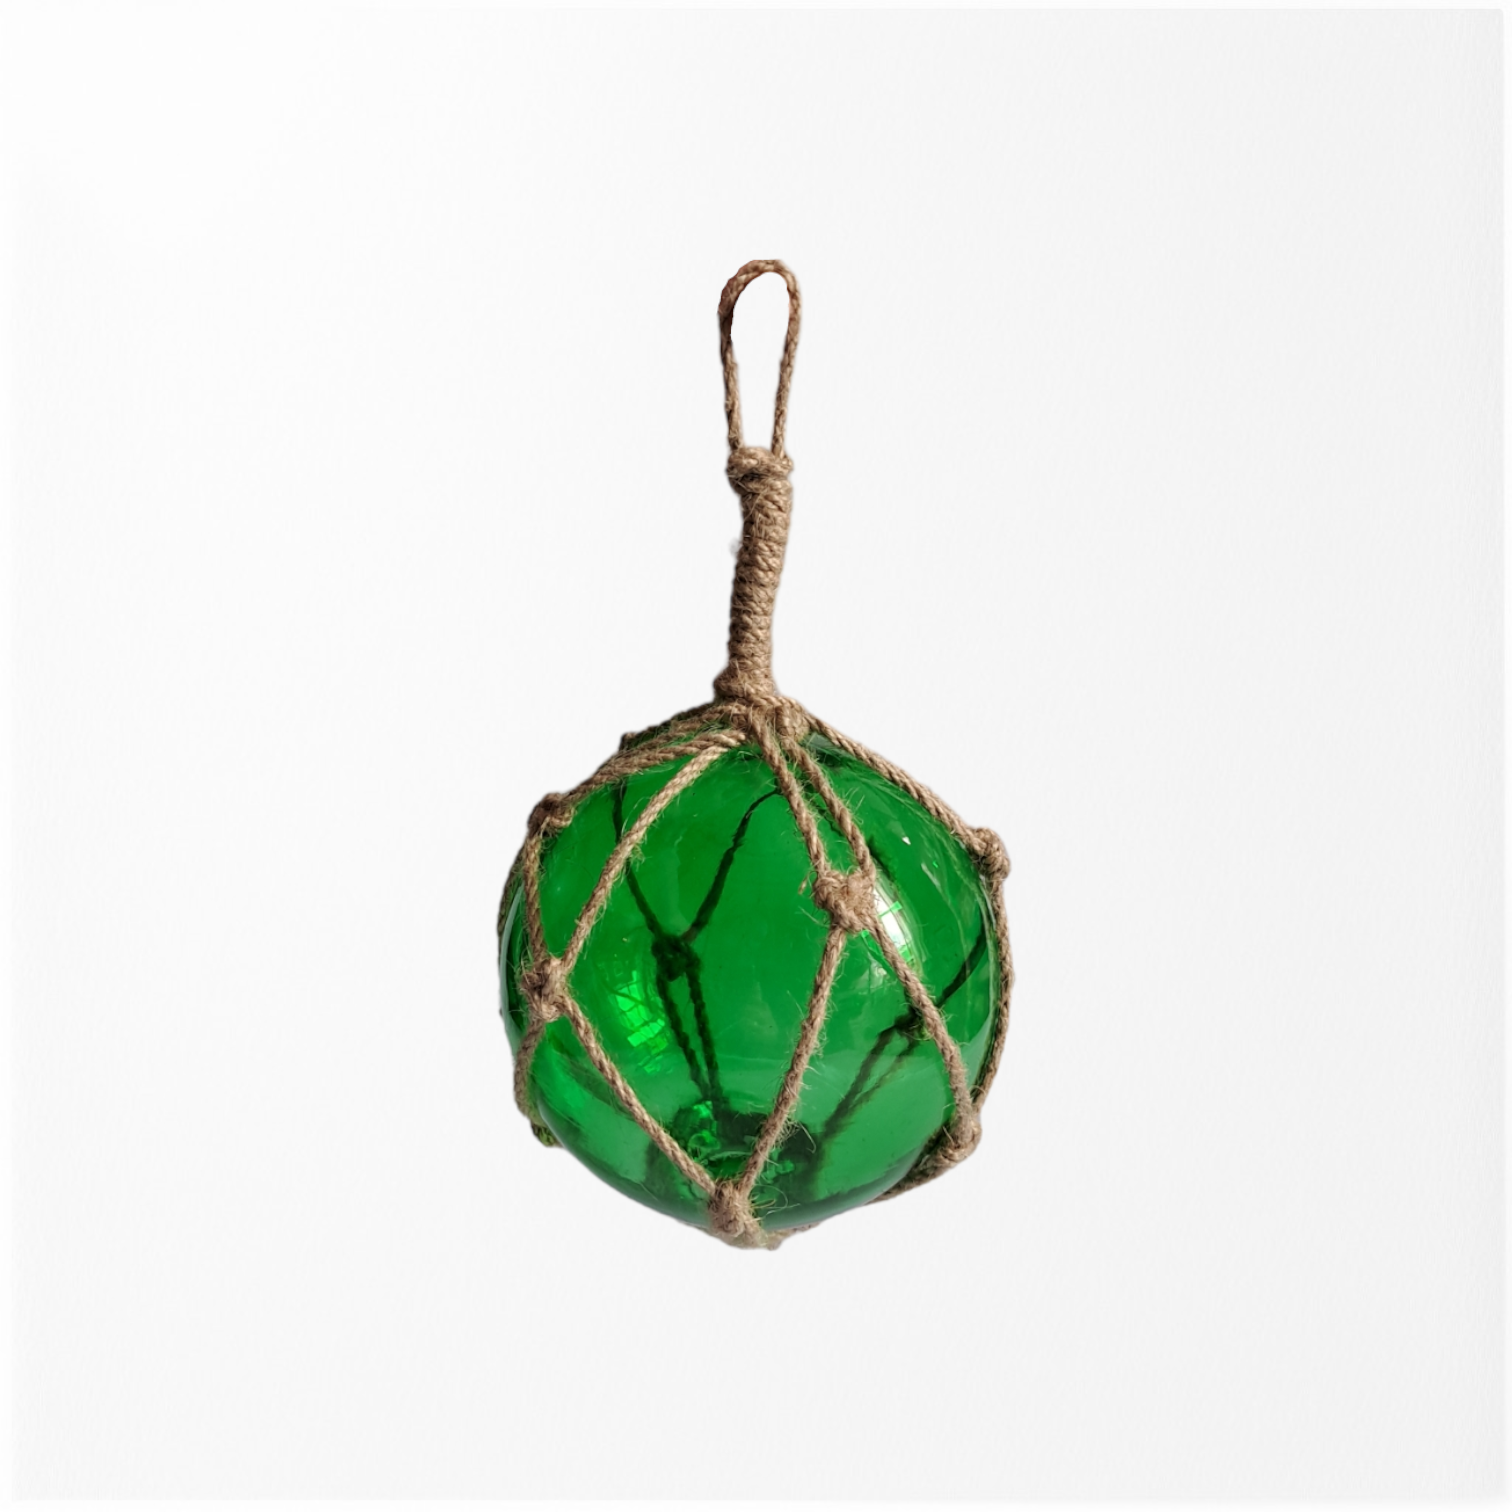 Glass Buoy Wrapped In Rope - 10cm Green